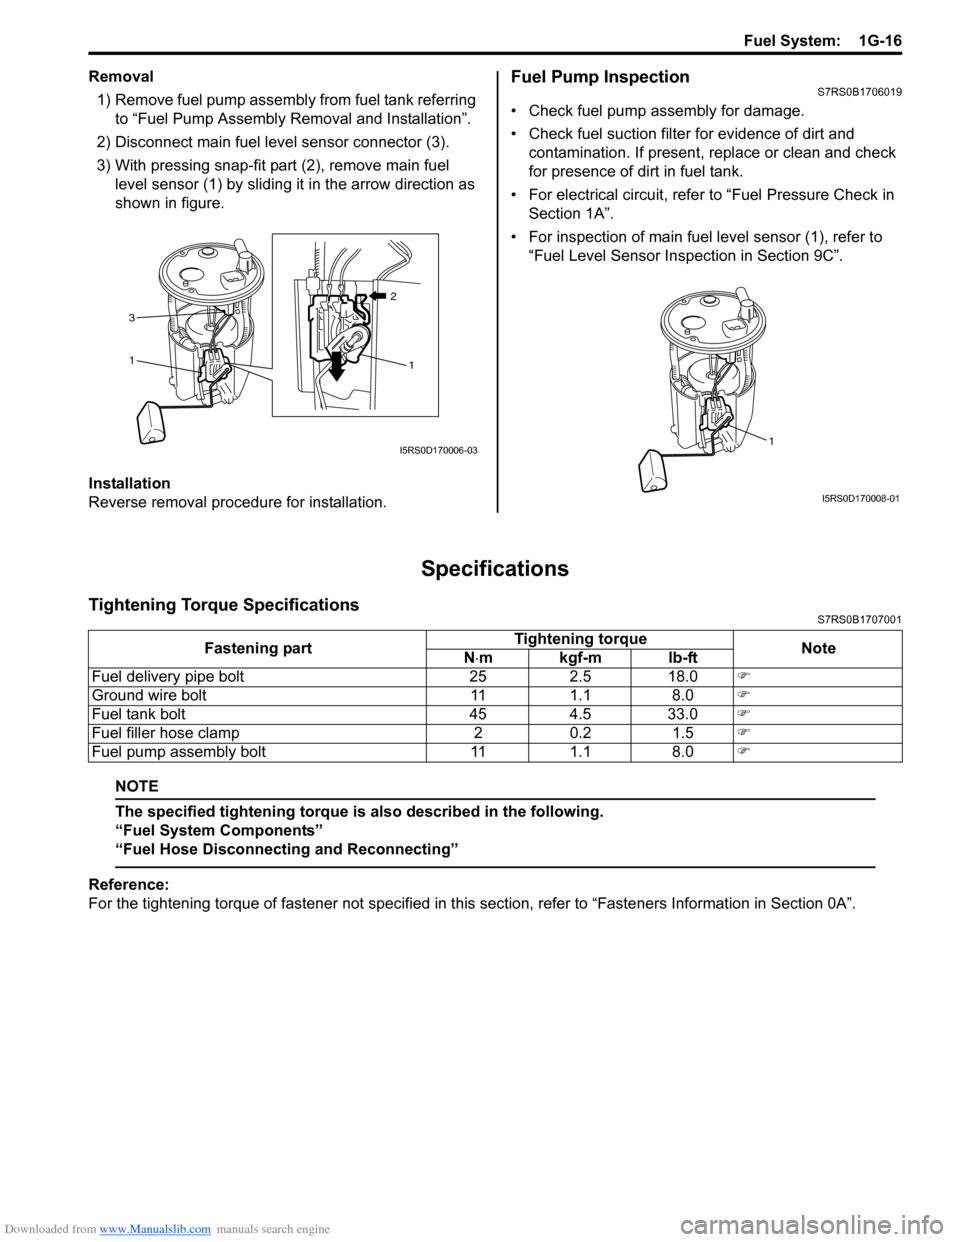 SUZUKI SWIFT 2008 2.G Service Workshop Manual Downloaded from www.Manualslib.com manuals search engine Fuel System:  1G-16
Removal1) Remove fuel pump assembly from fuel tank referring  to “Fuel Pump Assembly Removal and Installation”.
2) Disc